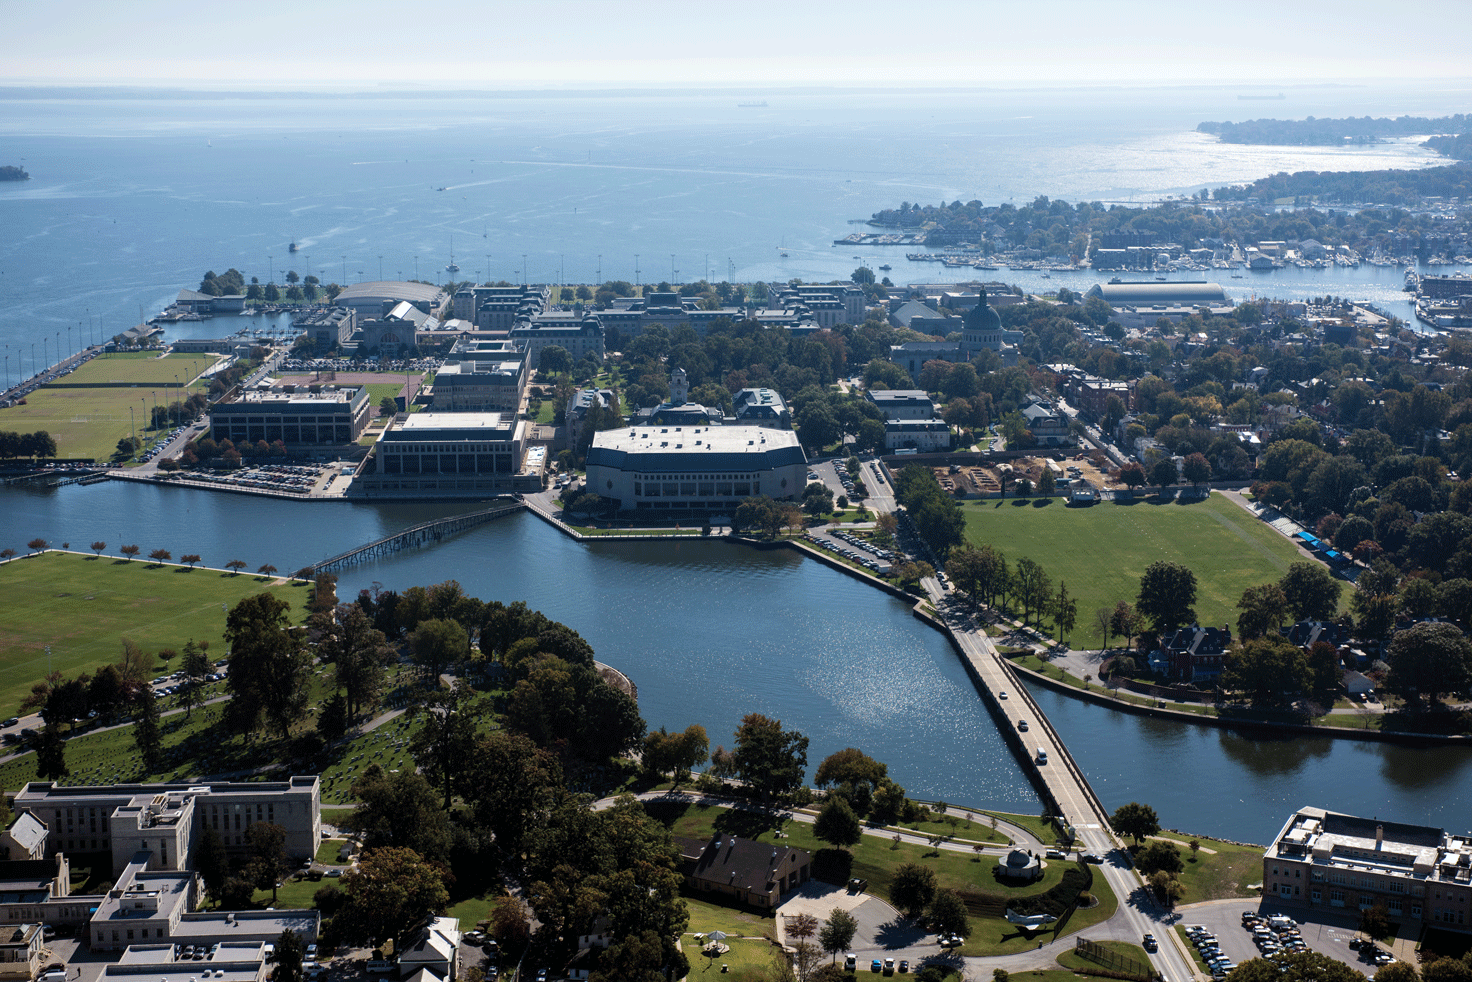 The U.S. Naval Academy is located along the Chesapeake Bay in Annapolis, Maryland.
                        The campus has taken measures to minimize flooding damages, but in high-tide flooding,
                        Ramsay Road routinely floods. Photograph credit: U.S. Naval Academy. 